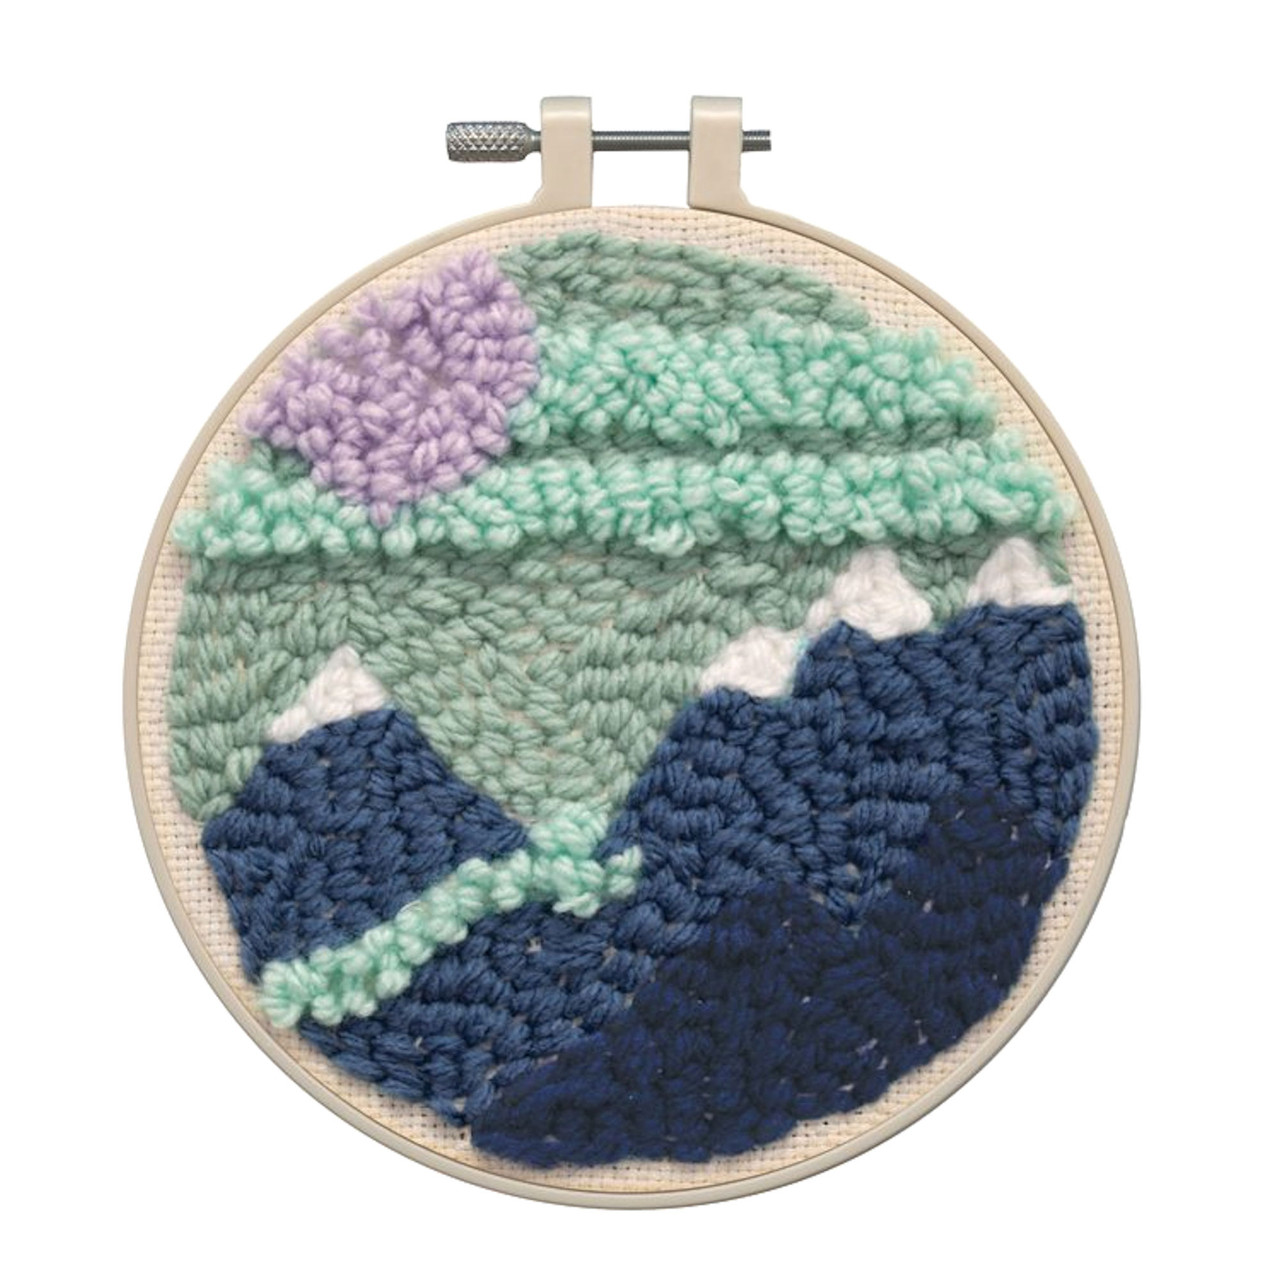 Design Works Punch Needle - Mountains w/6" Hoop